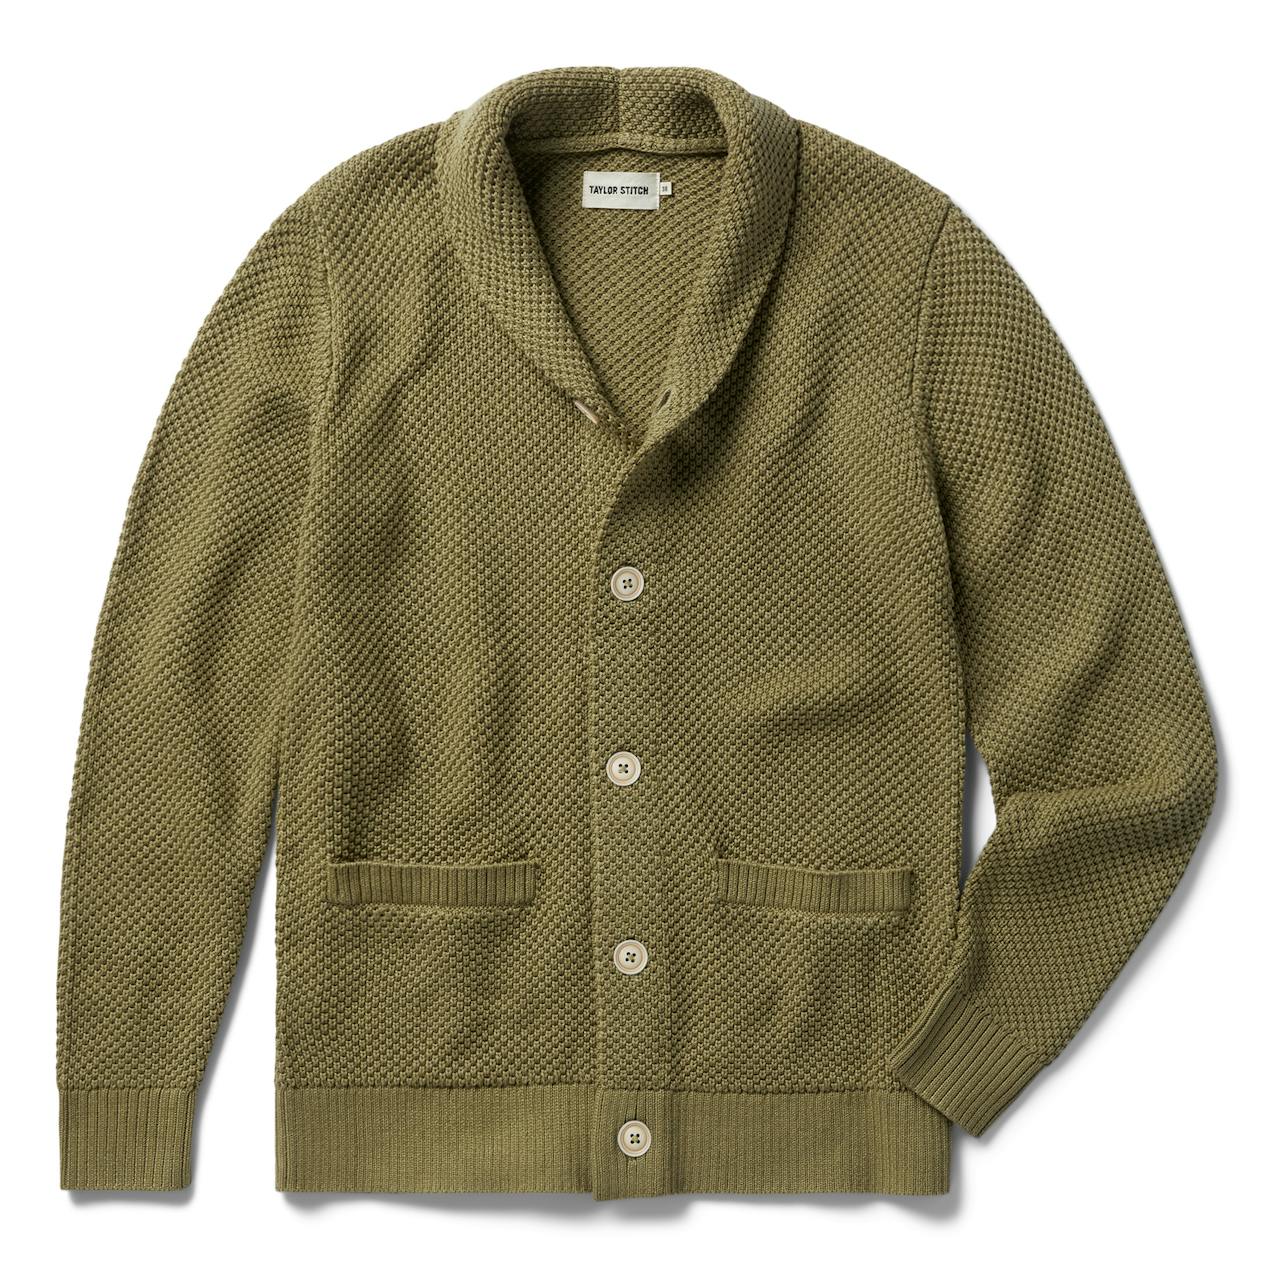 | Huckberry Crawford Cardigan The Stitch - Sweaters Sweater Cardigan | Taylor - Exclusive Moss